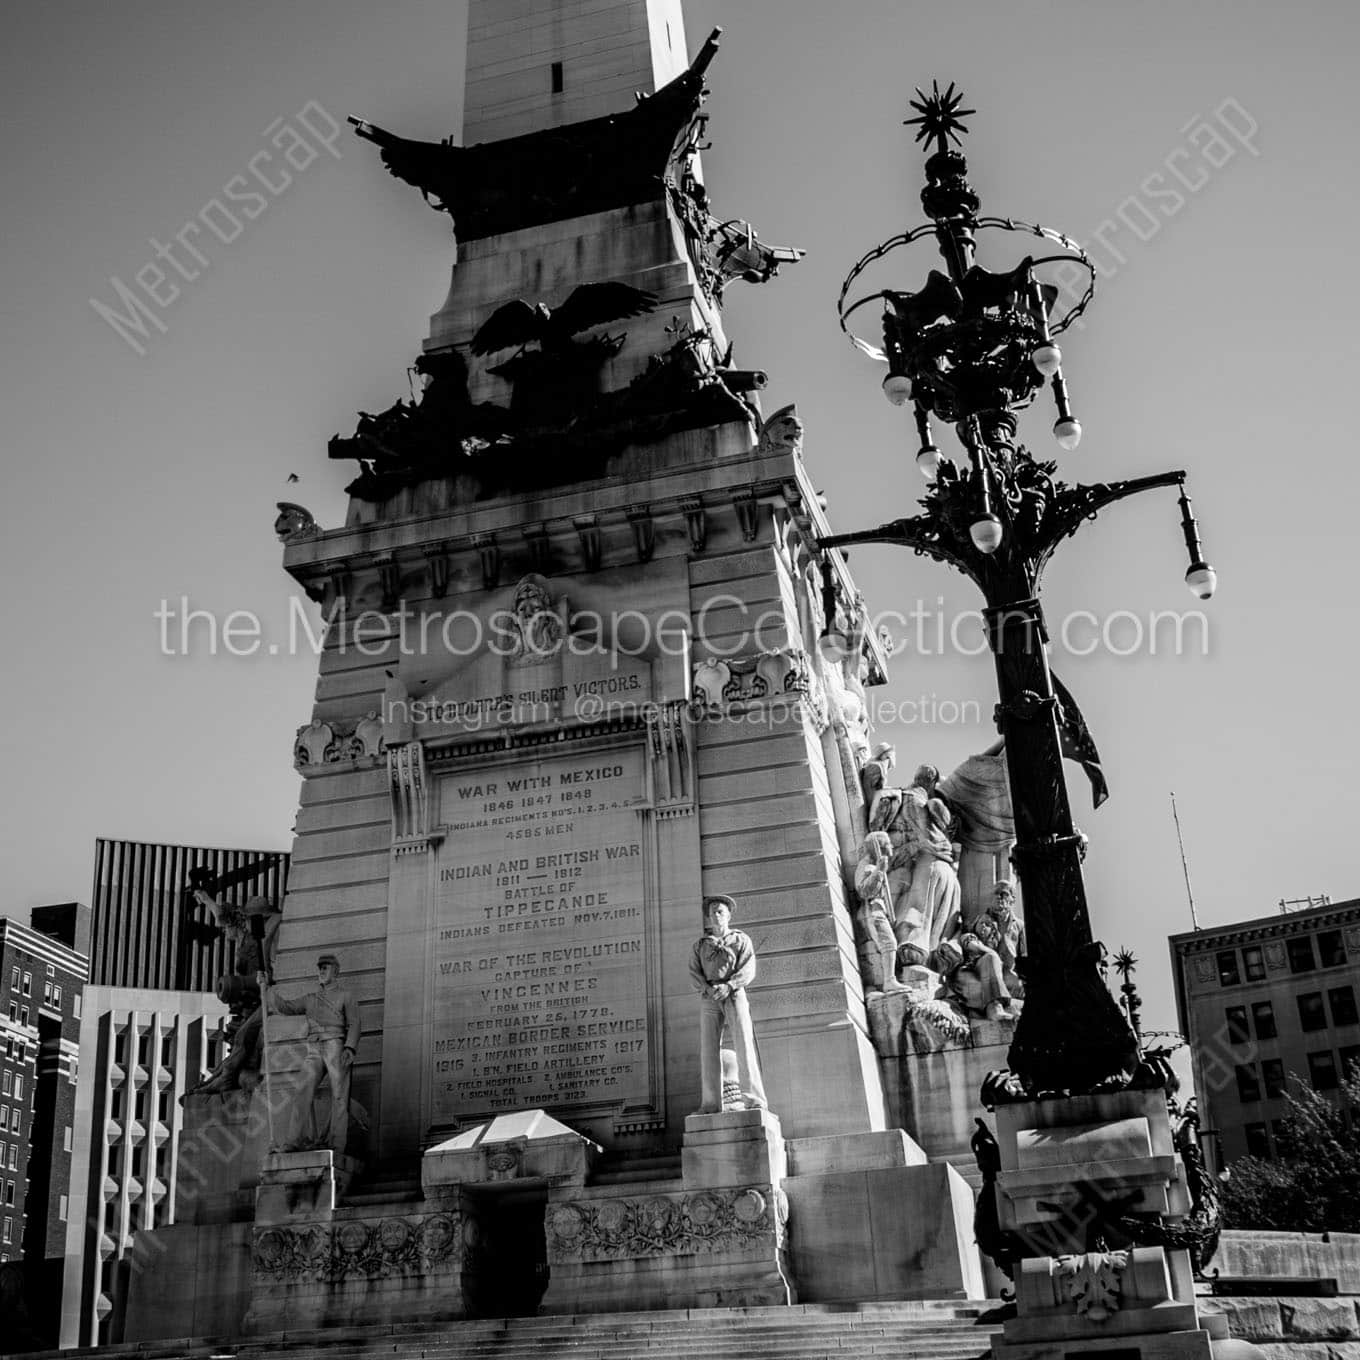 north side soldiers sailors monument Black & White Office Art